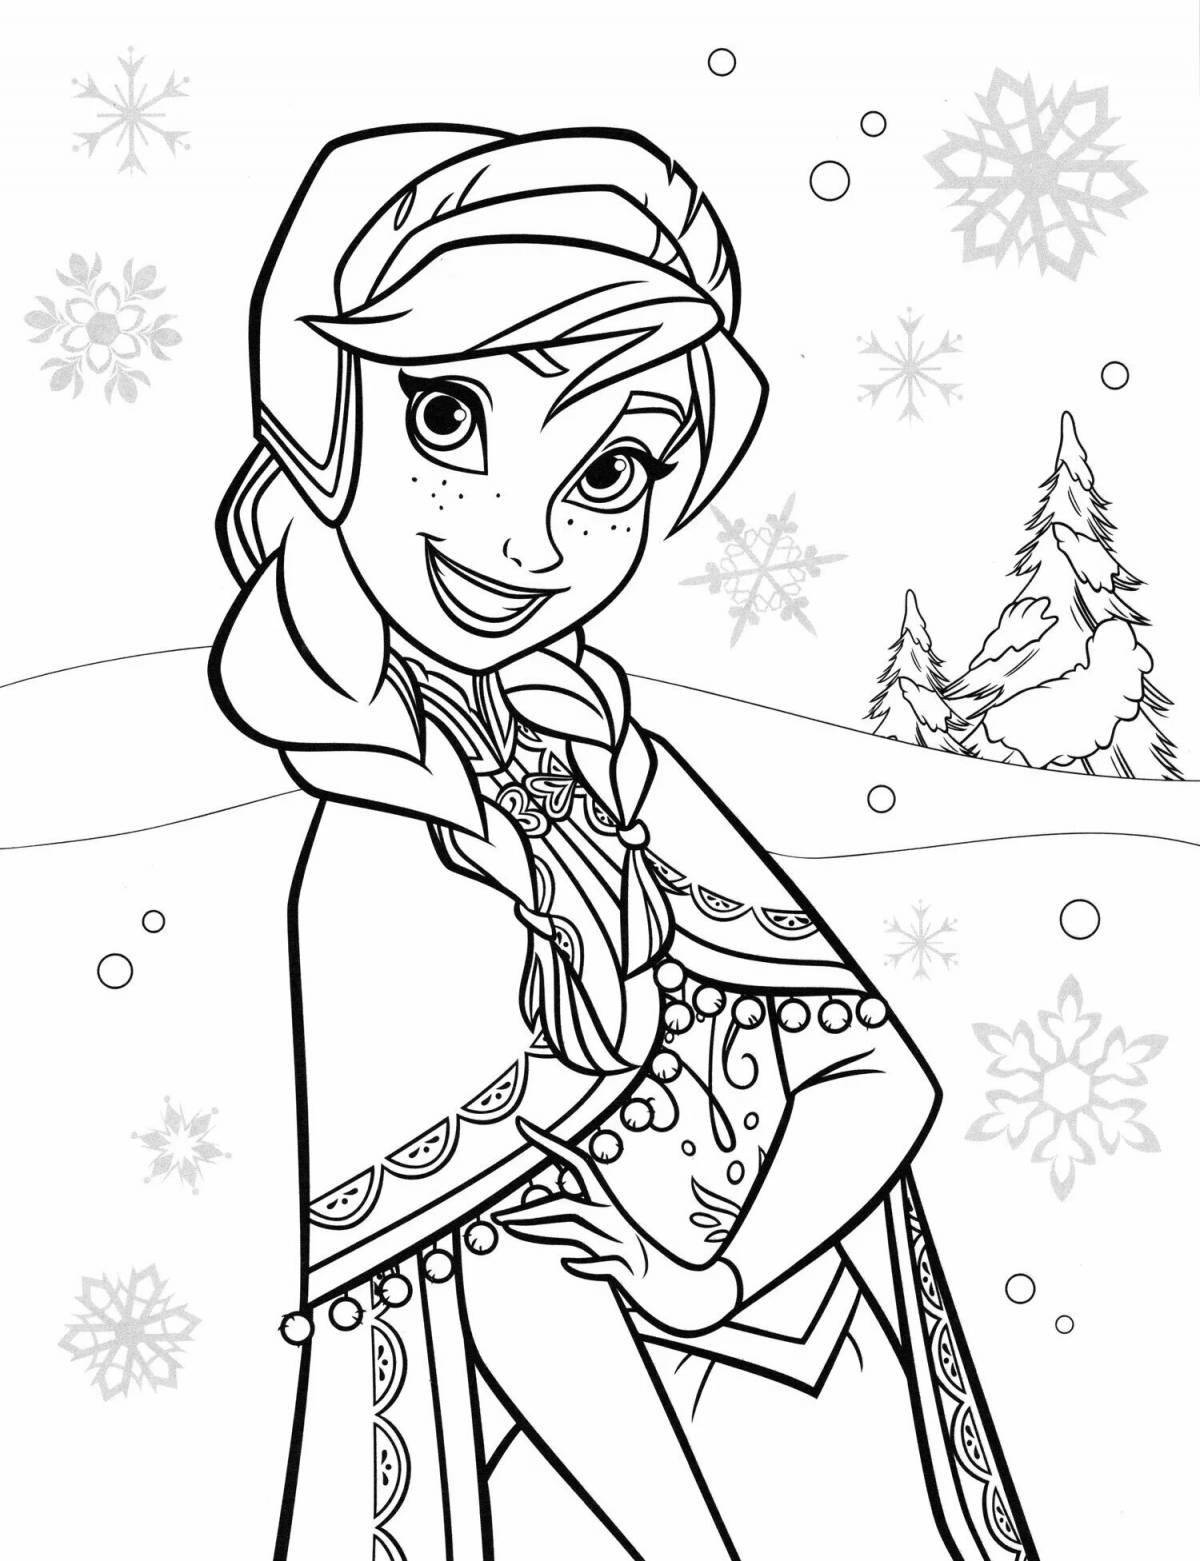 Amazing Cold Heart coloring book for 5-6 year olds